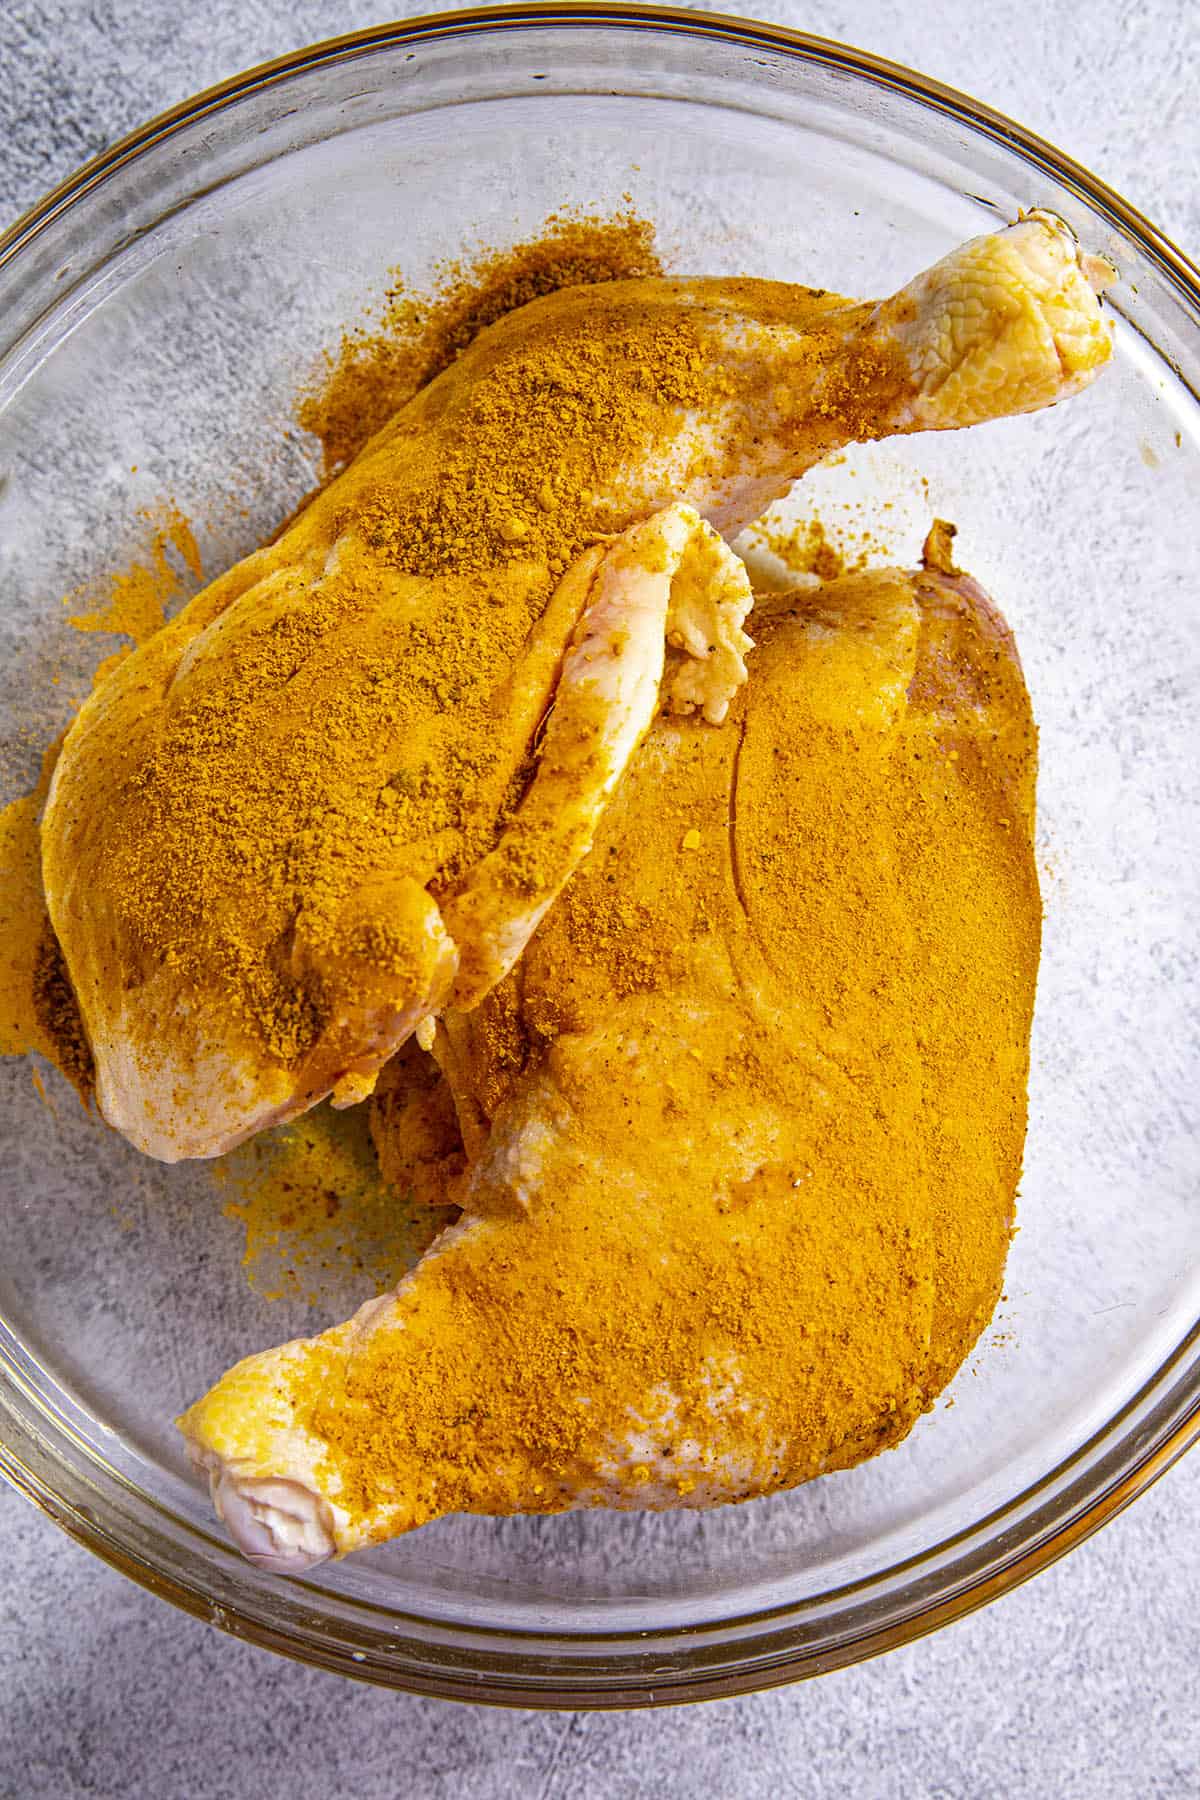 Seasoning 2 large pieces of chicken with homemade Jamaican Curry powder